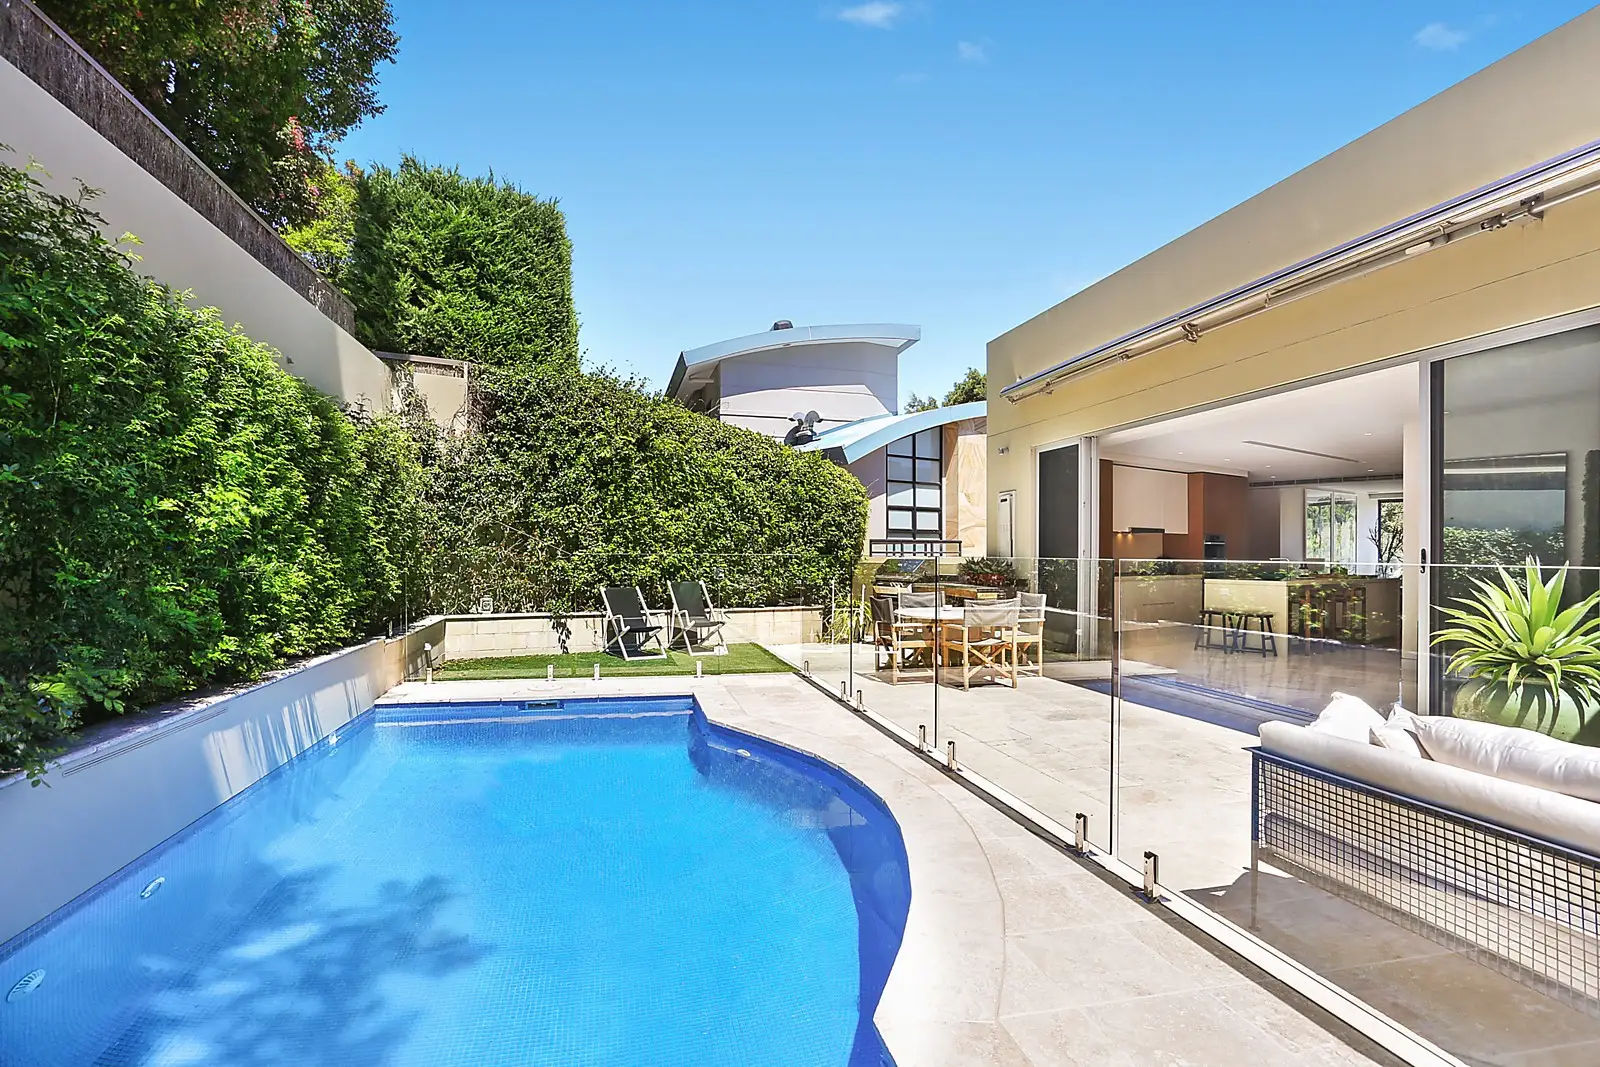 Photo #1: 3/12 Carlotta Road, Double Bay - Sold by Sydney Sotheby's International Realty